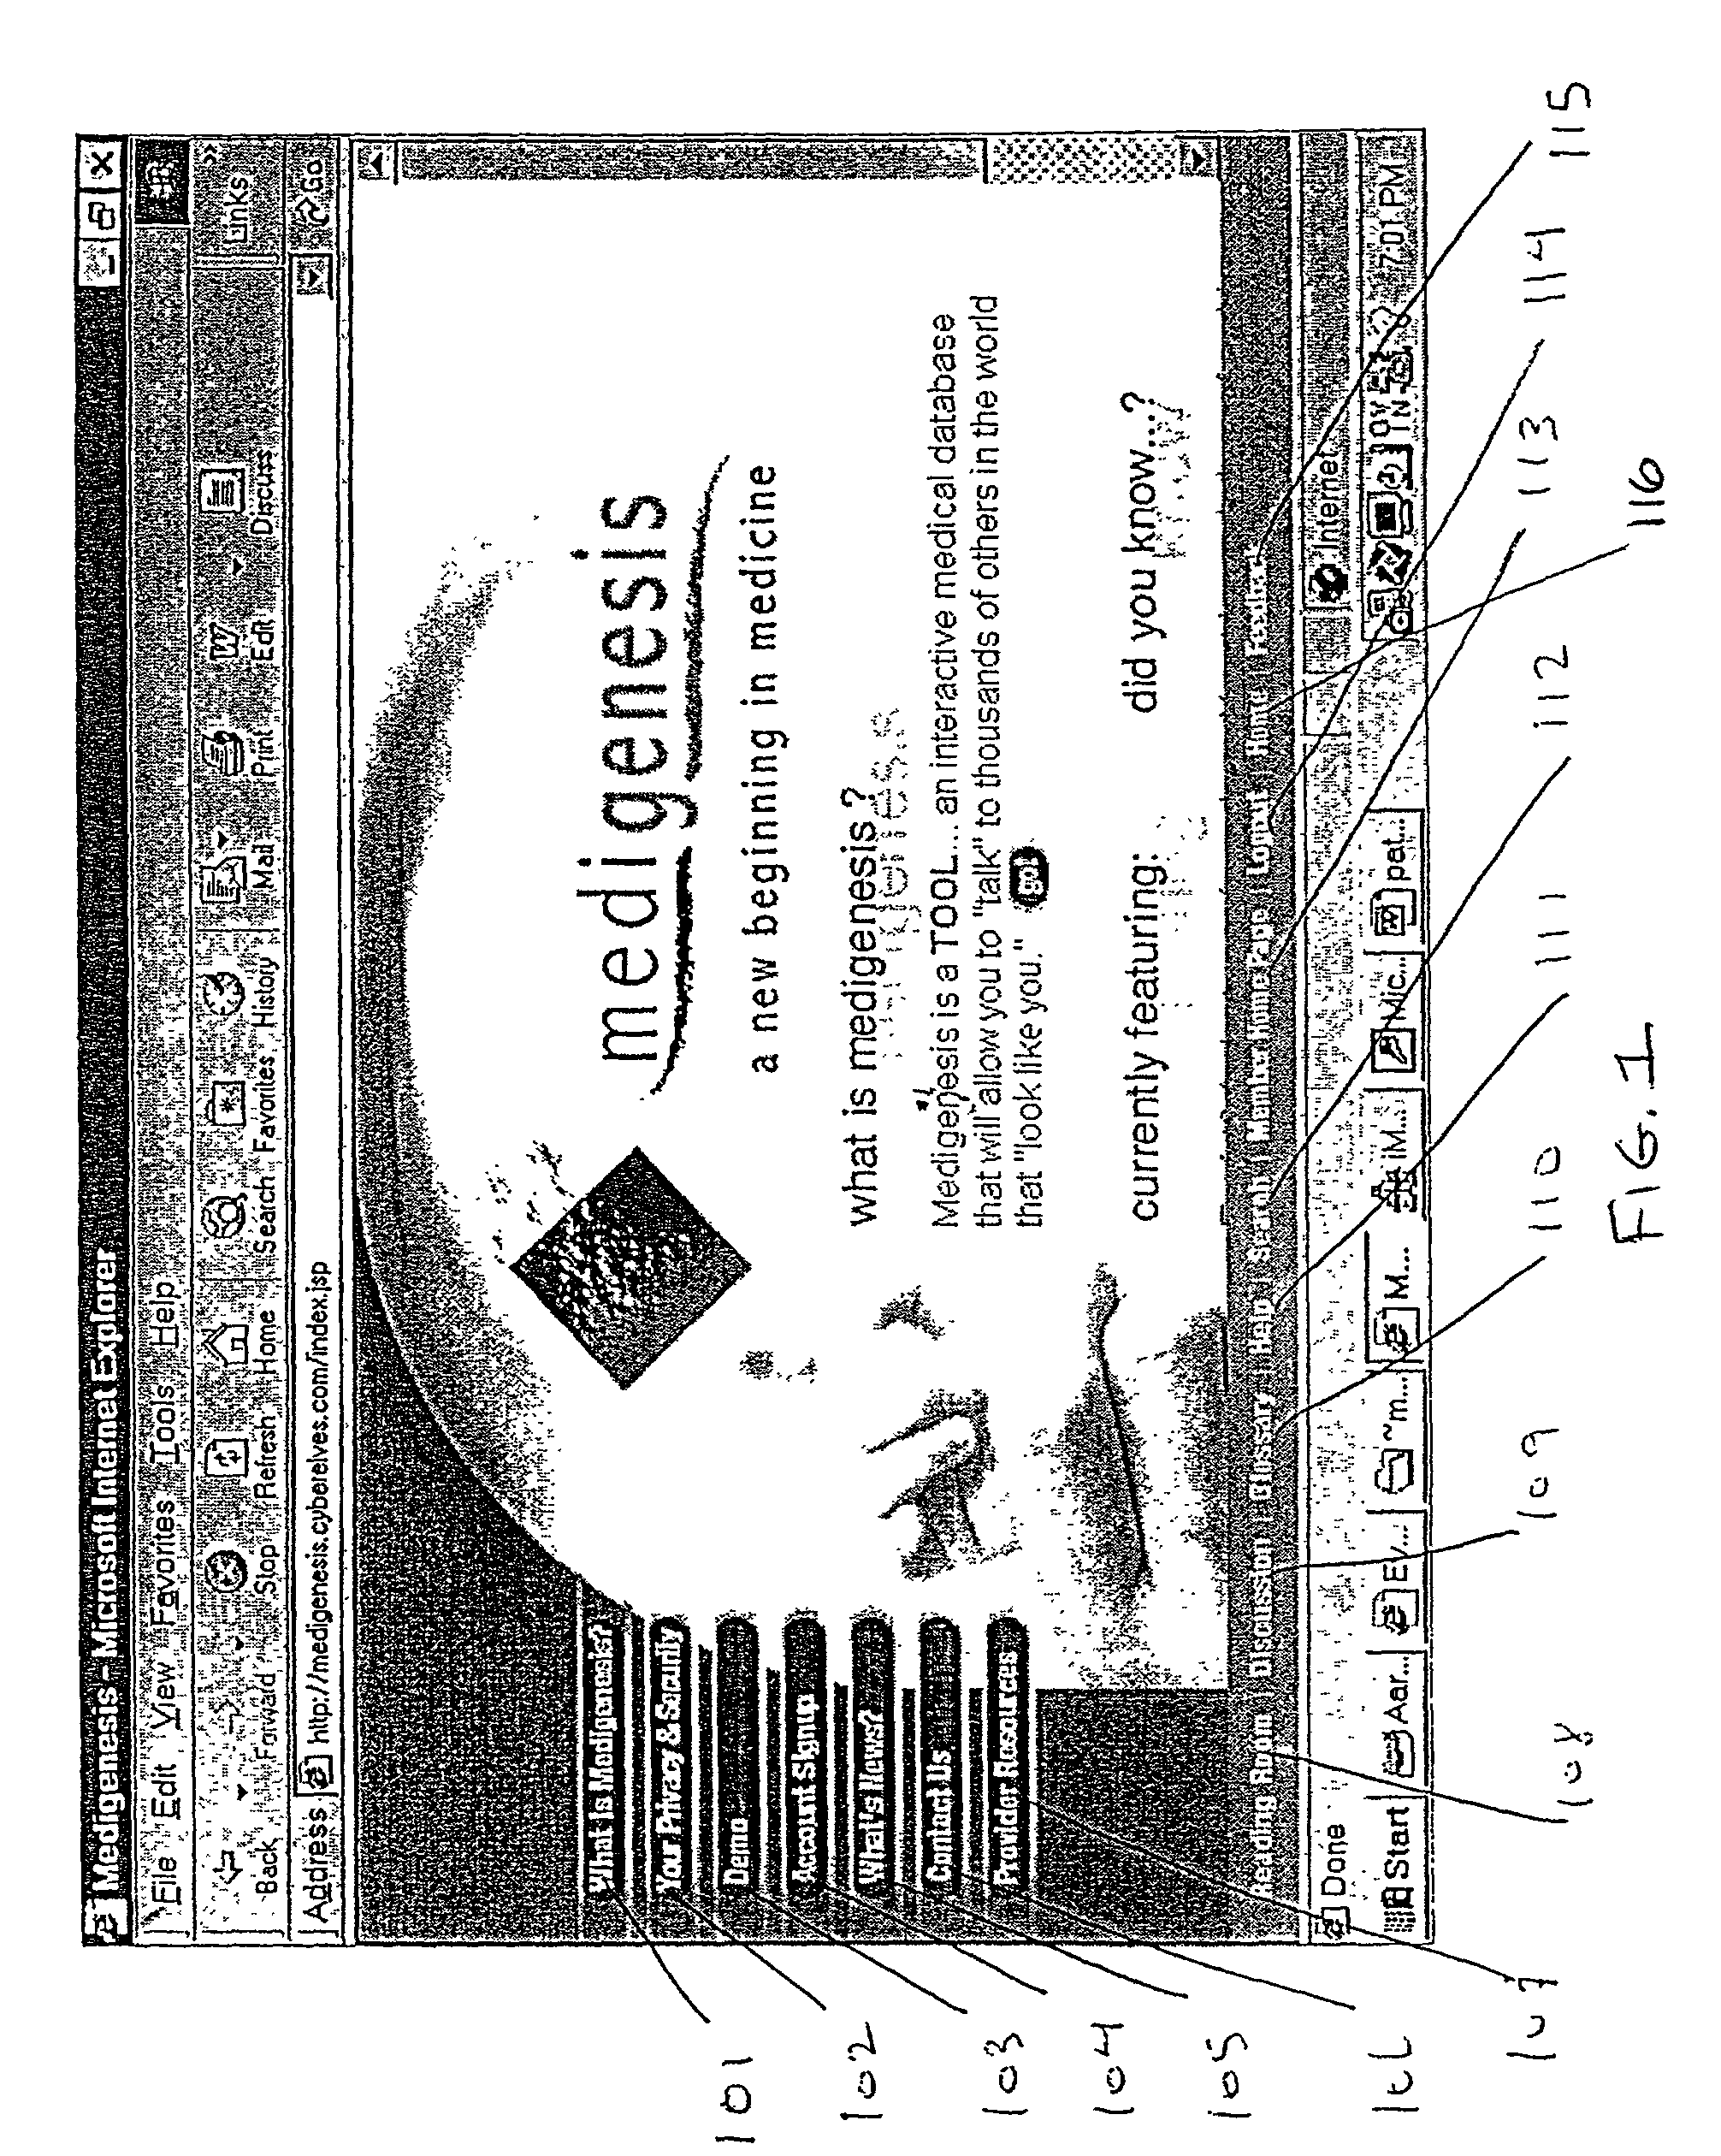 System and method for the automated presentation of system data to, and interaction with, a computer maintained database